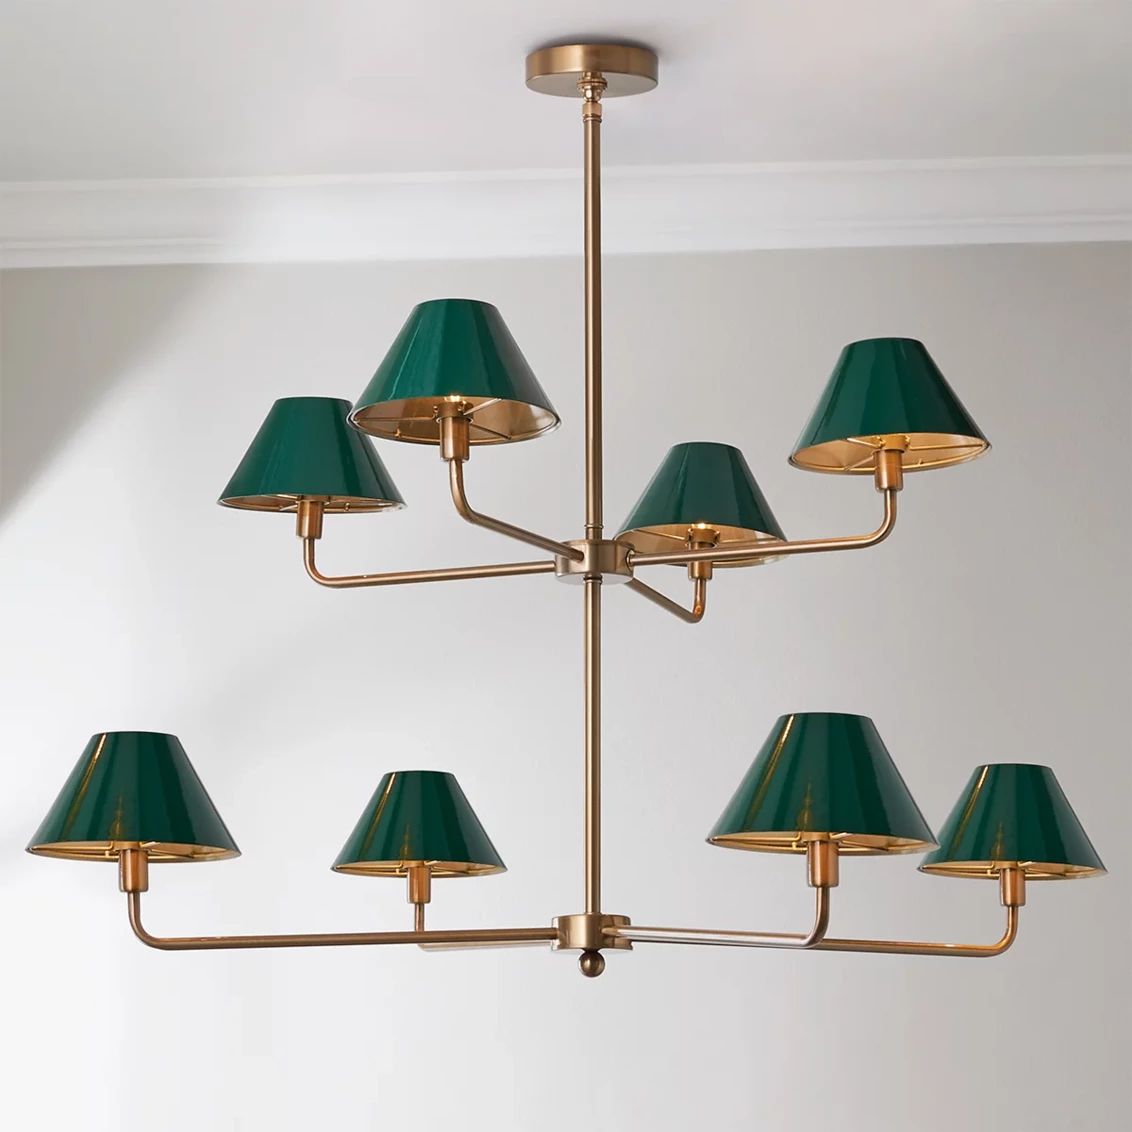 Chris Loves Julia Edie Two-Tier Chandelier - 8 Light | Shades of Light